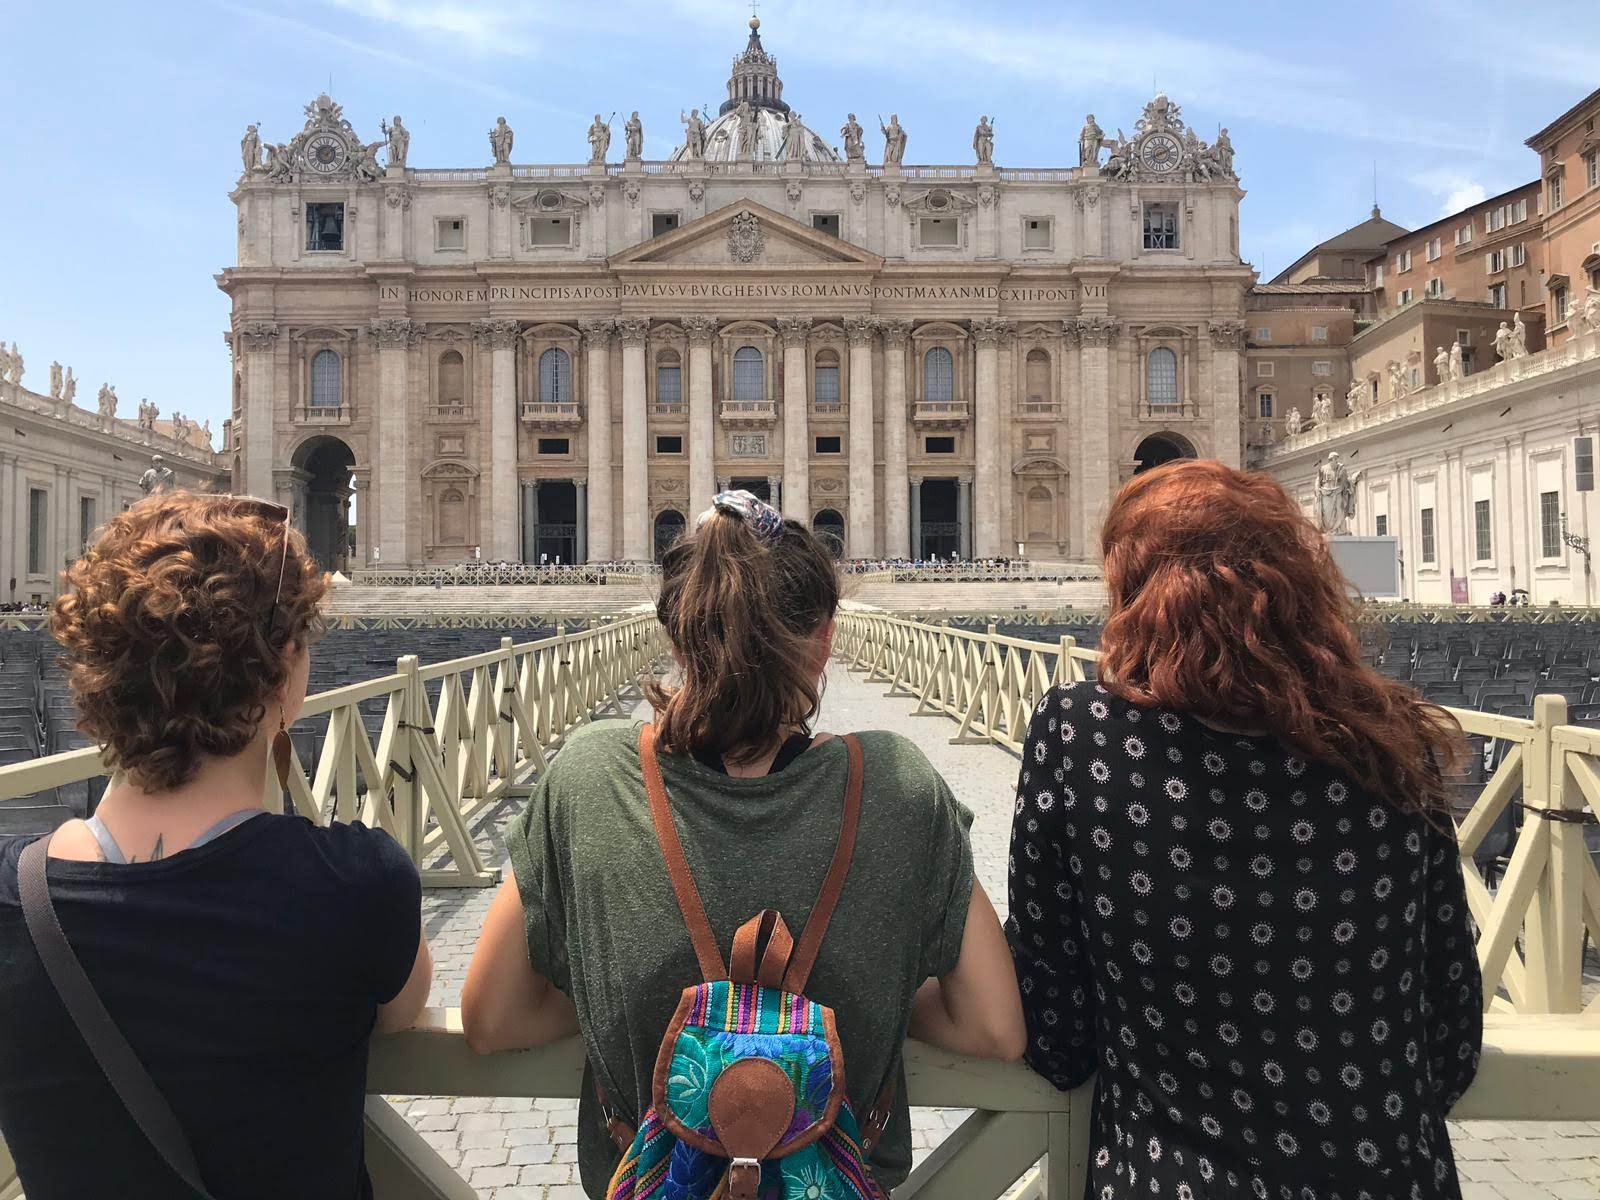 Theology students visit St Peter's Square